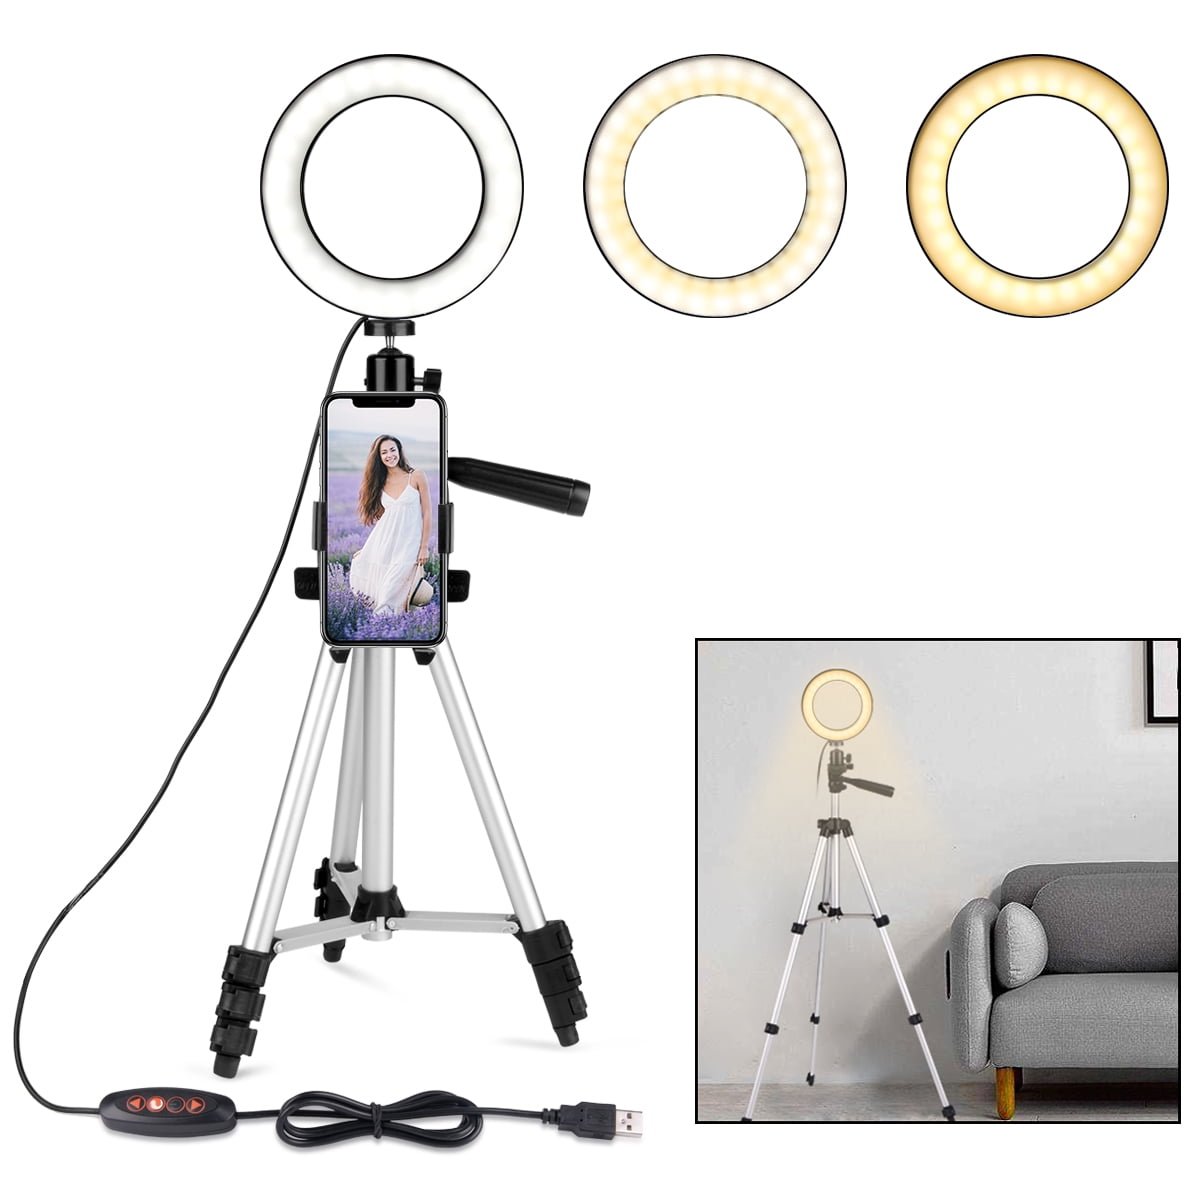 ON AIR 8” Portable LED Ring Light with Desktop India | Ubuy